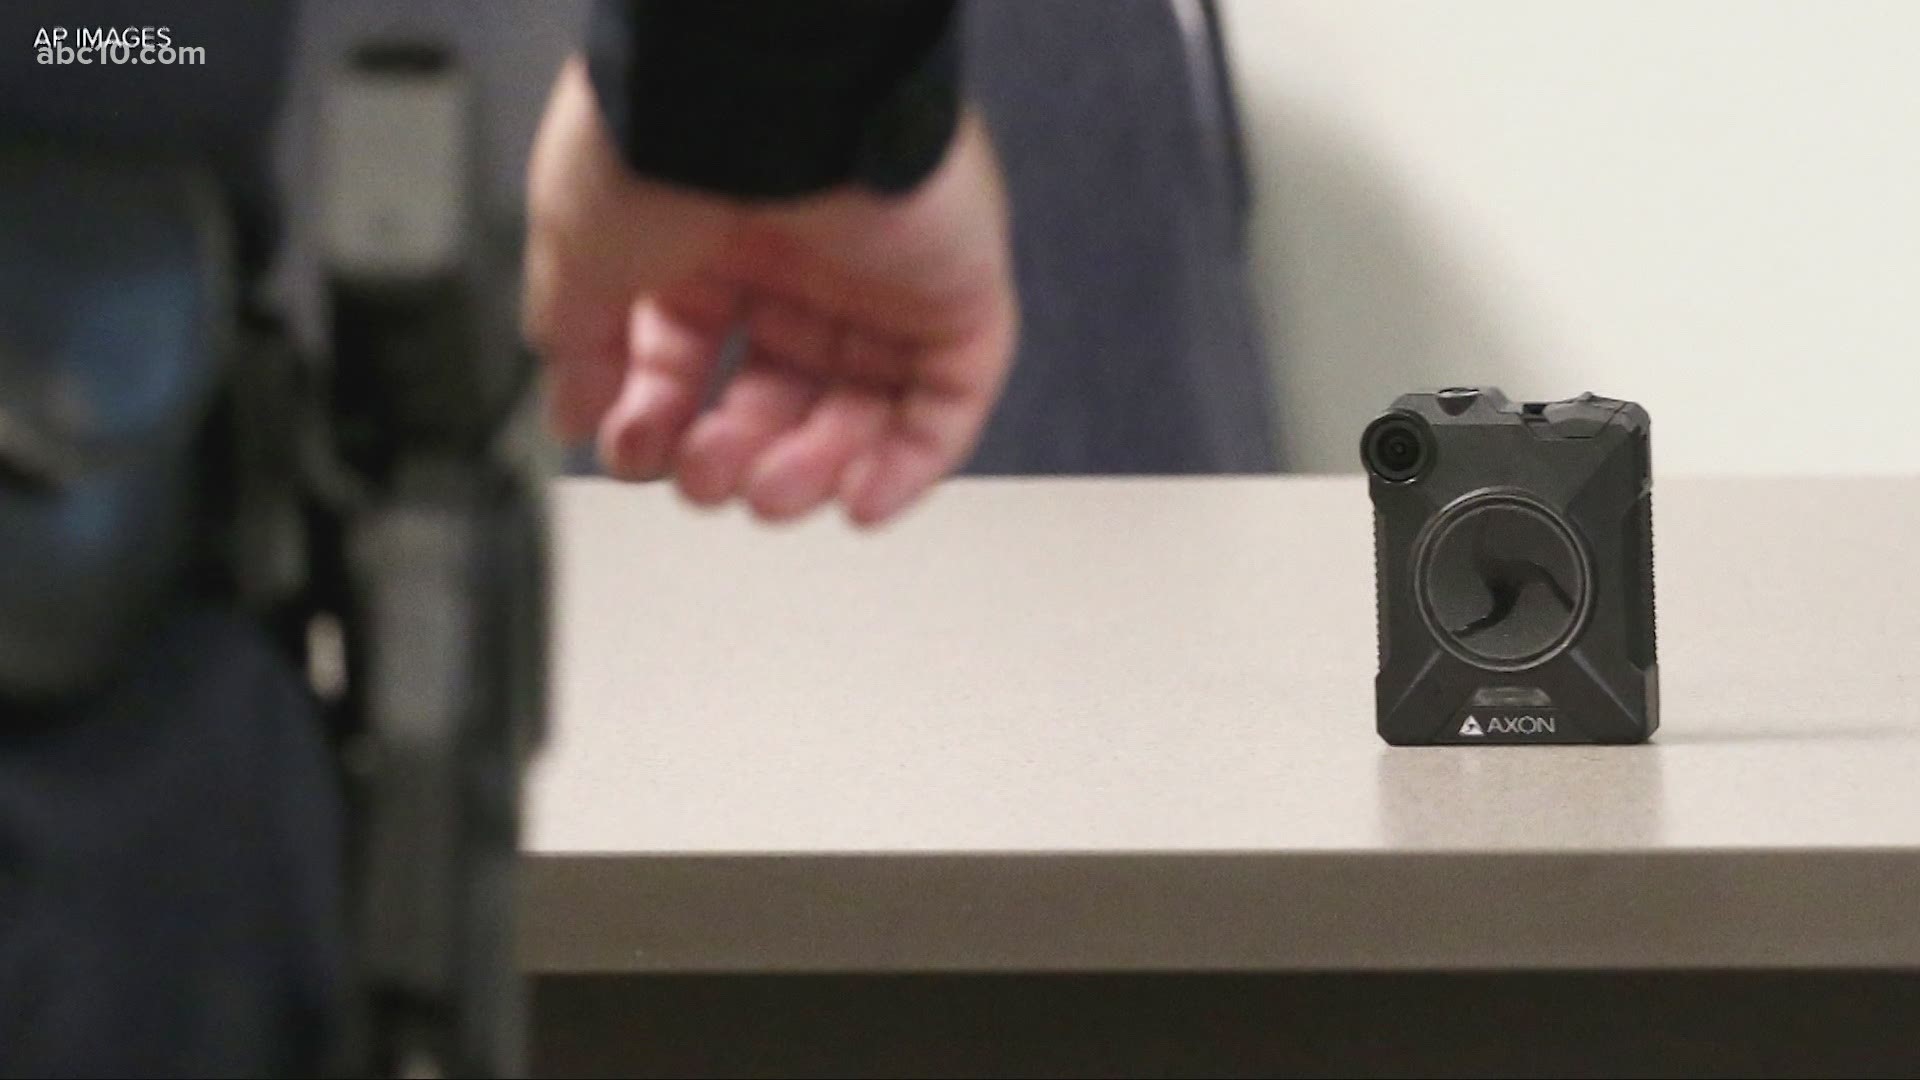 "These body cameras are yet another tool our officers will use during their investigations and to further our transparency within our community."